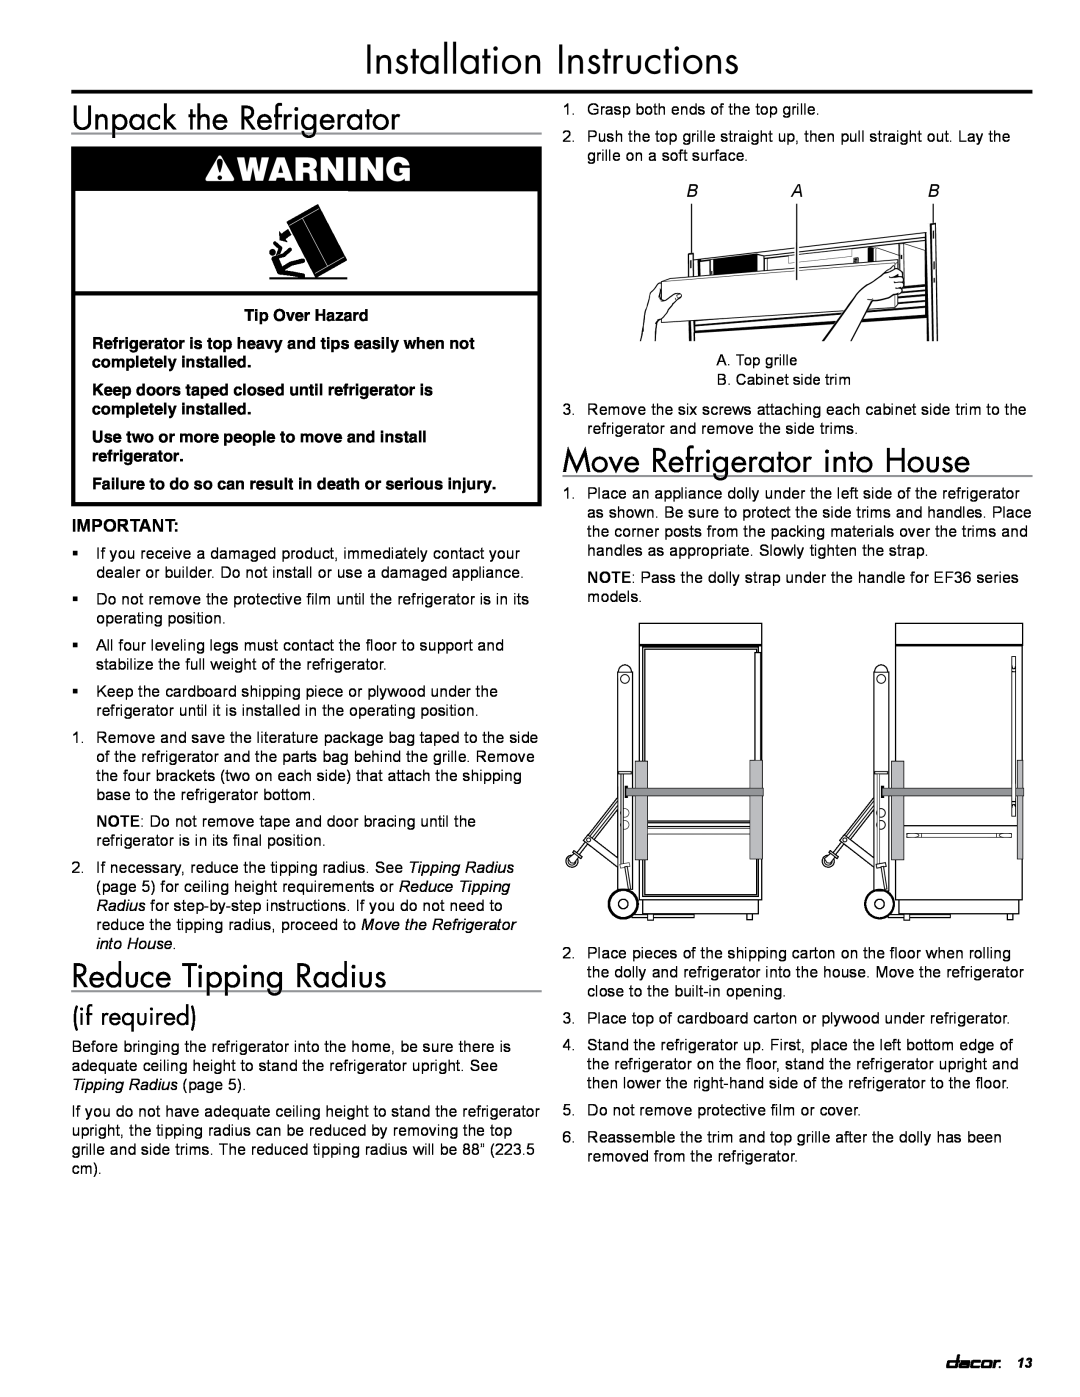 Dacor EF36LNBSS Installation Instructions, Unpack the Refrigerator, Reduce Tipping Radius, Move Refrigerator into House 